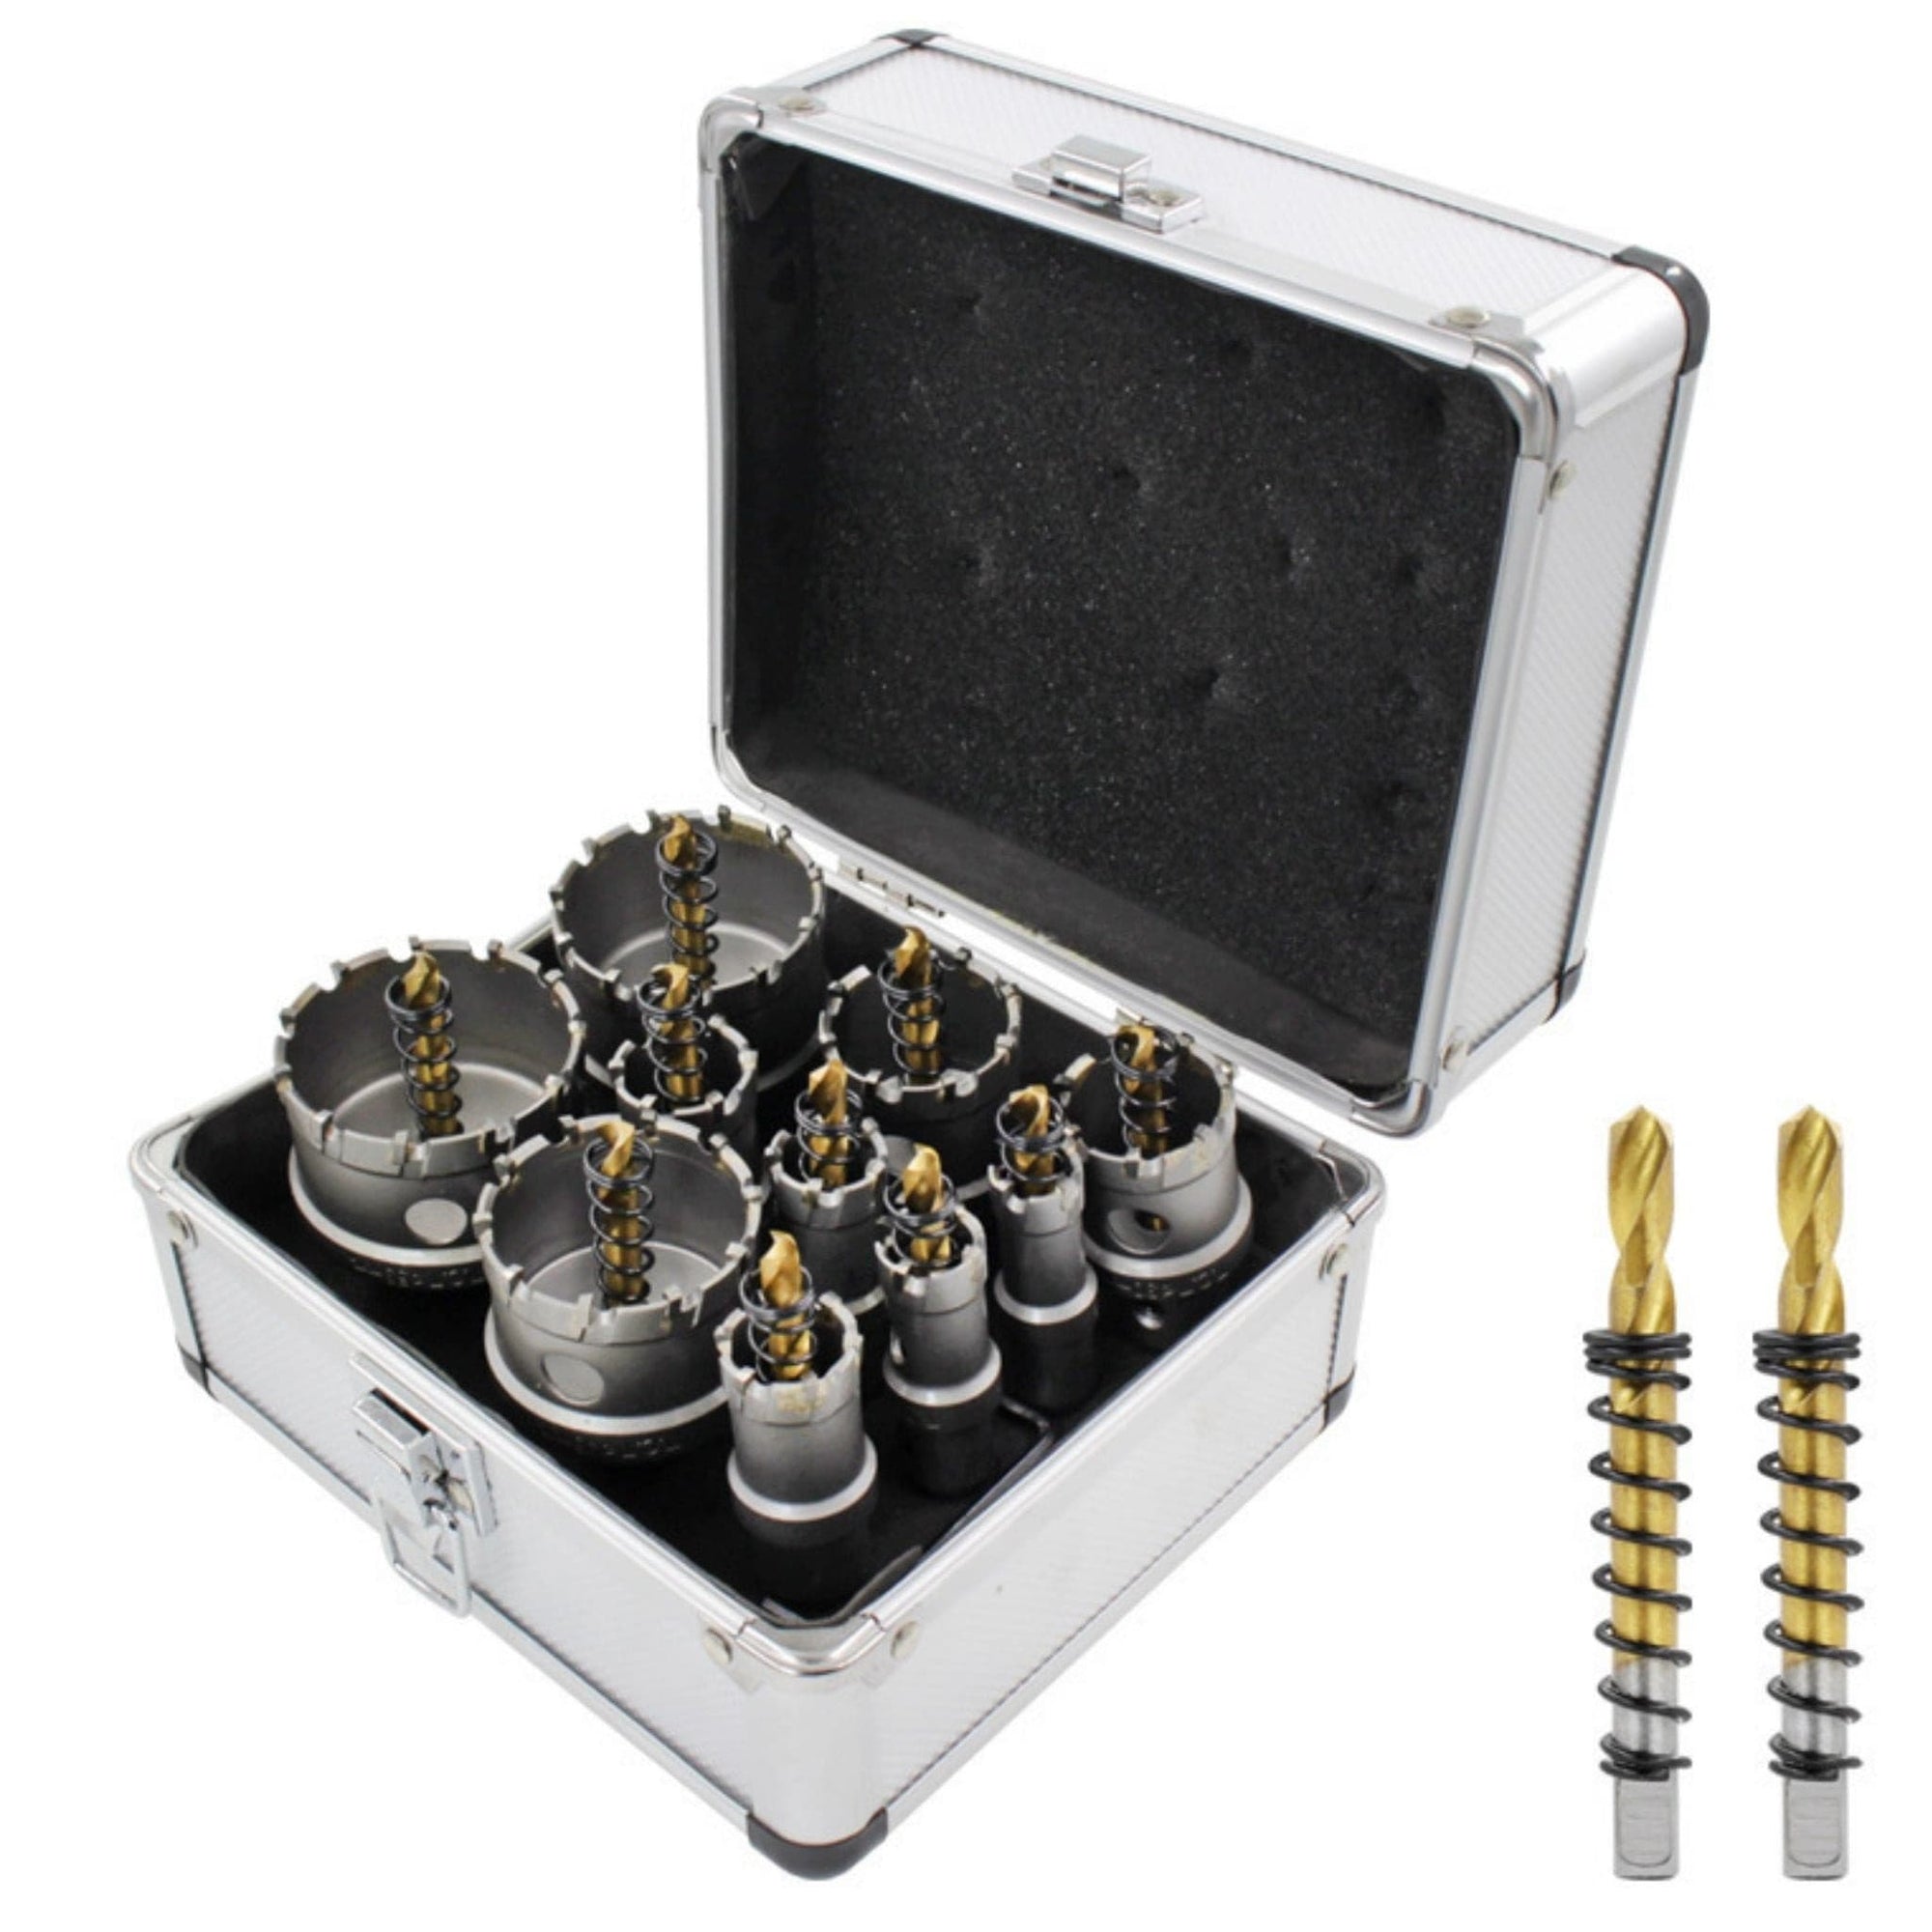 10 Piece Hole Saw Kit for Metal and Stainless Steel - South East Clearance Centre